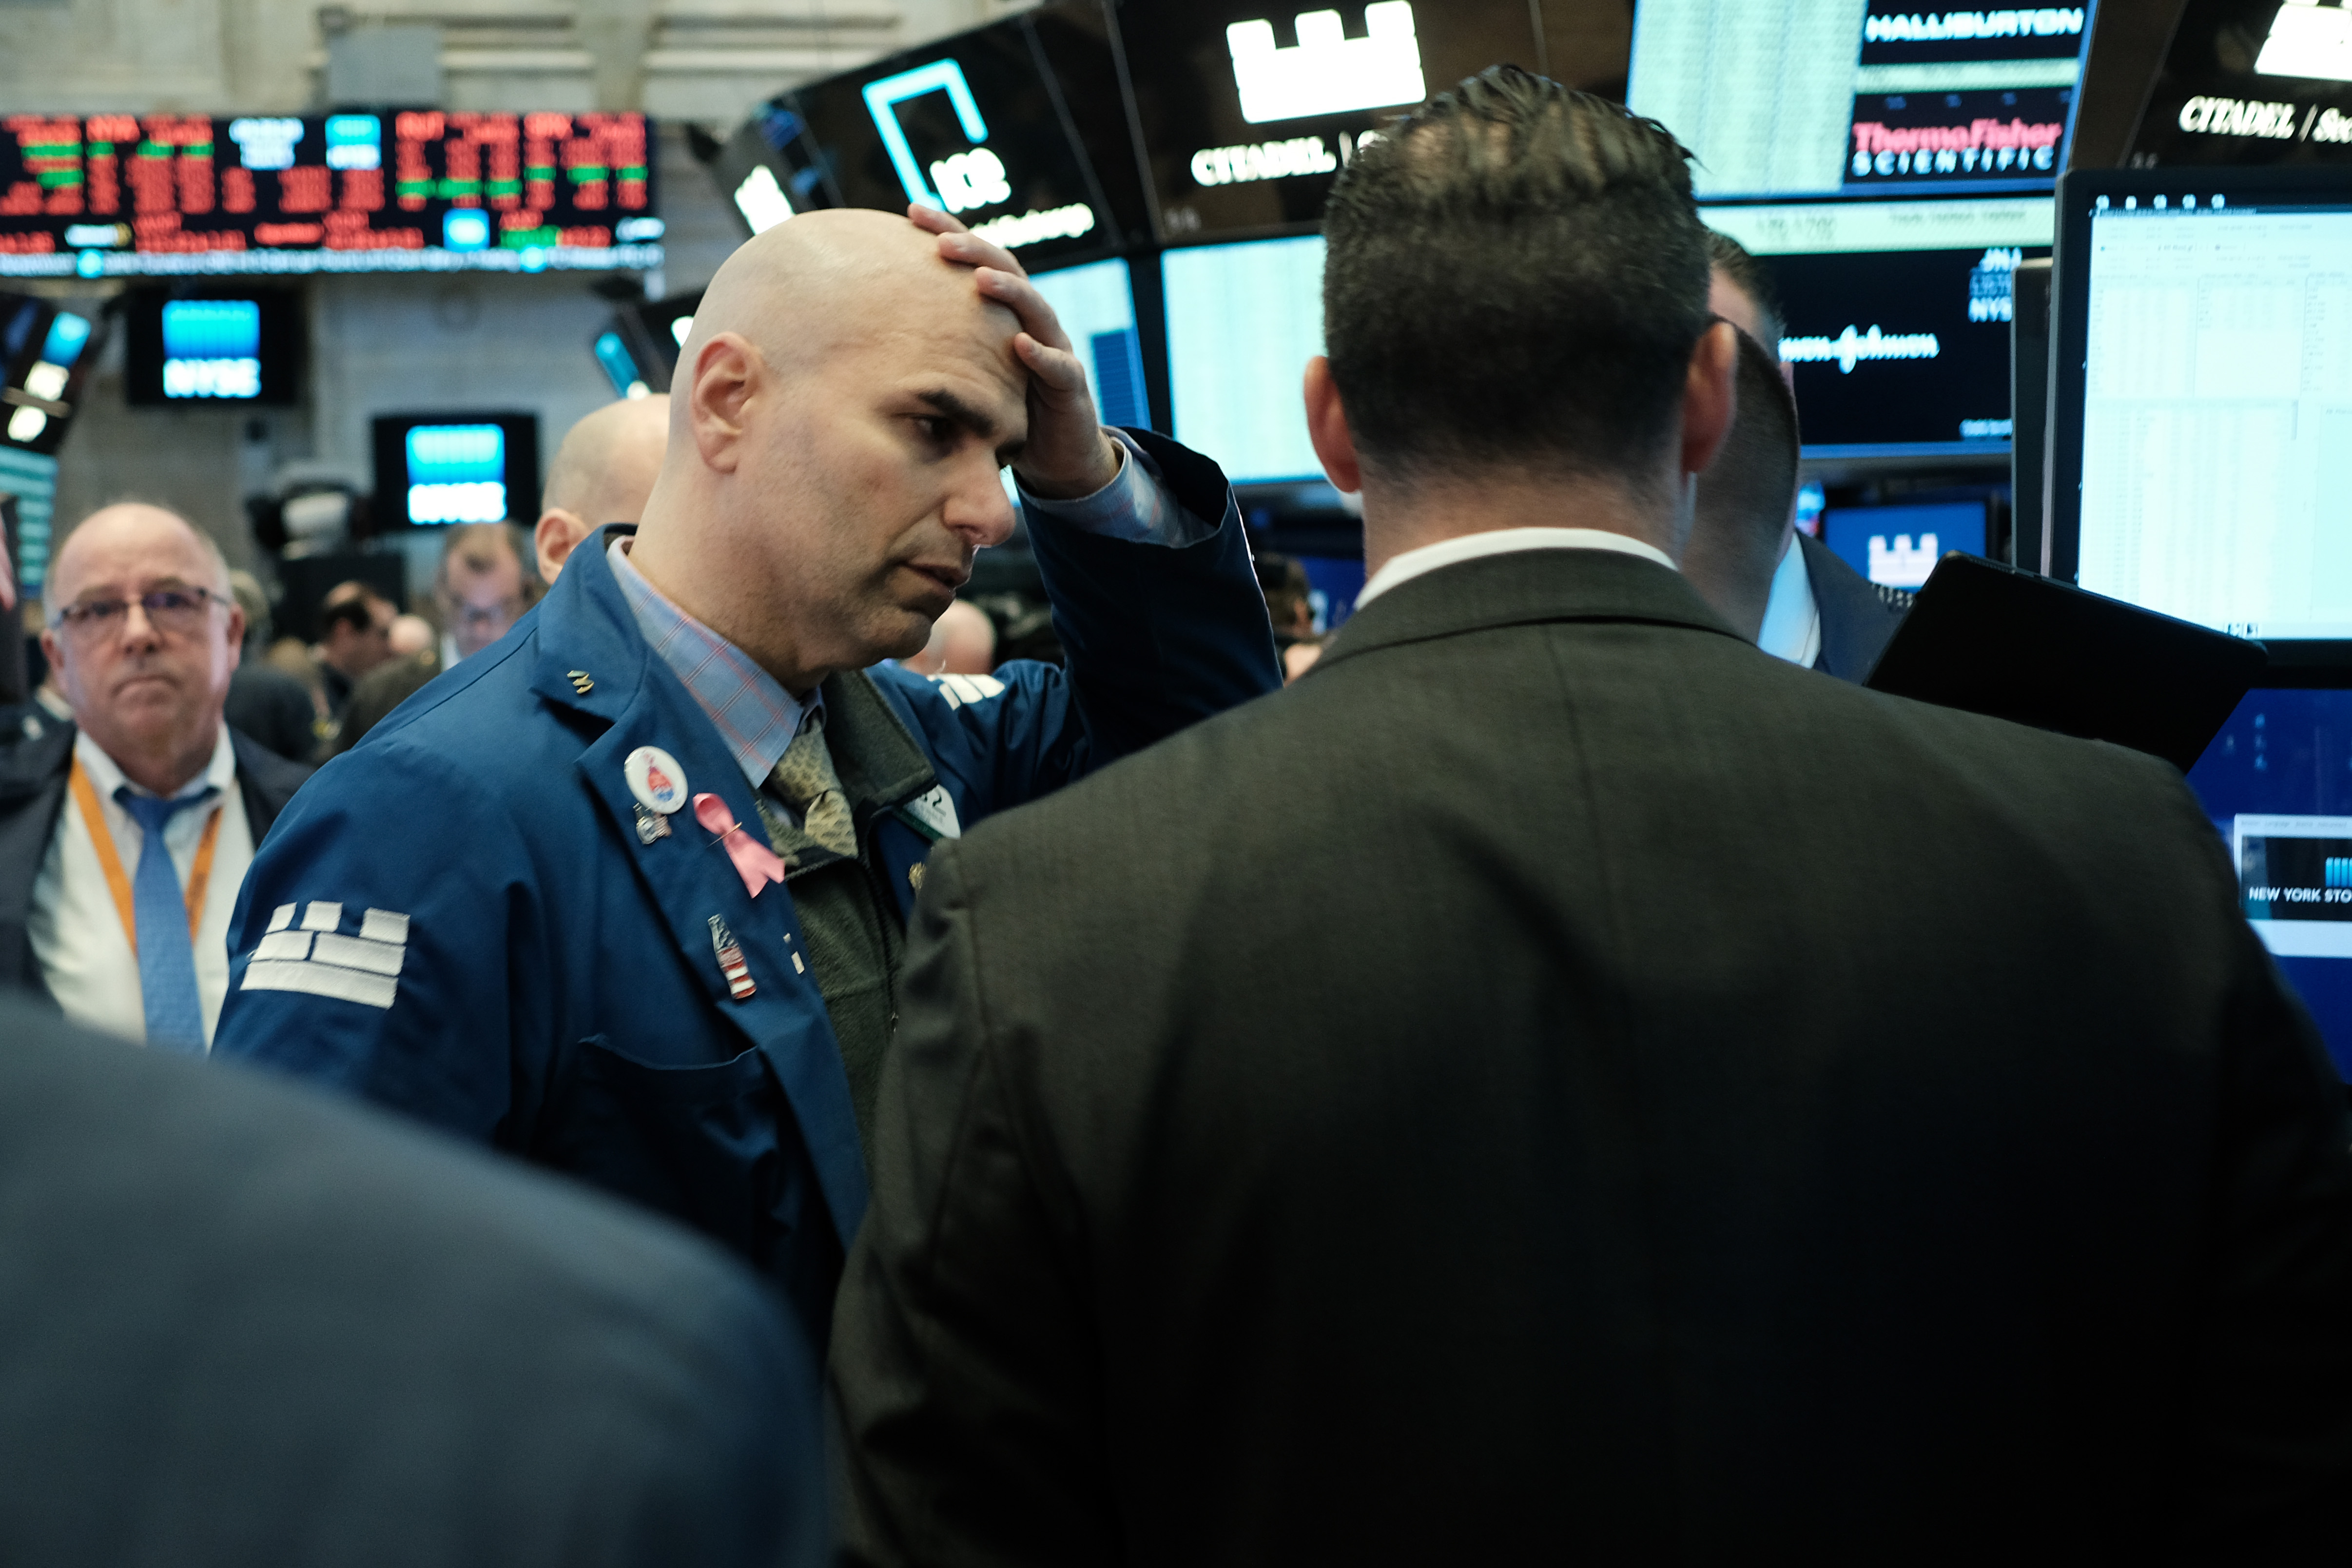 The Stock Market Just Dropped Nearly 8%. Here's What You Need to Do Now